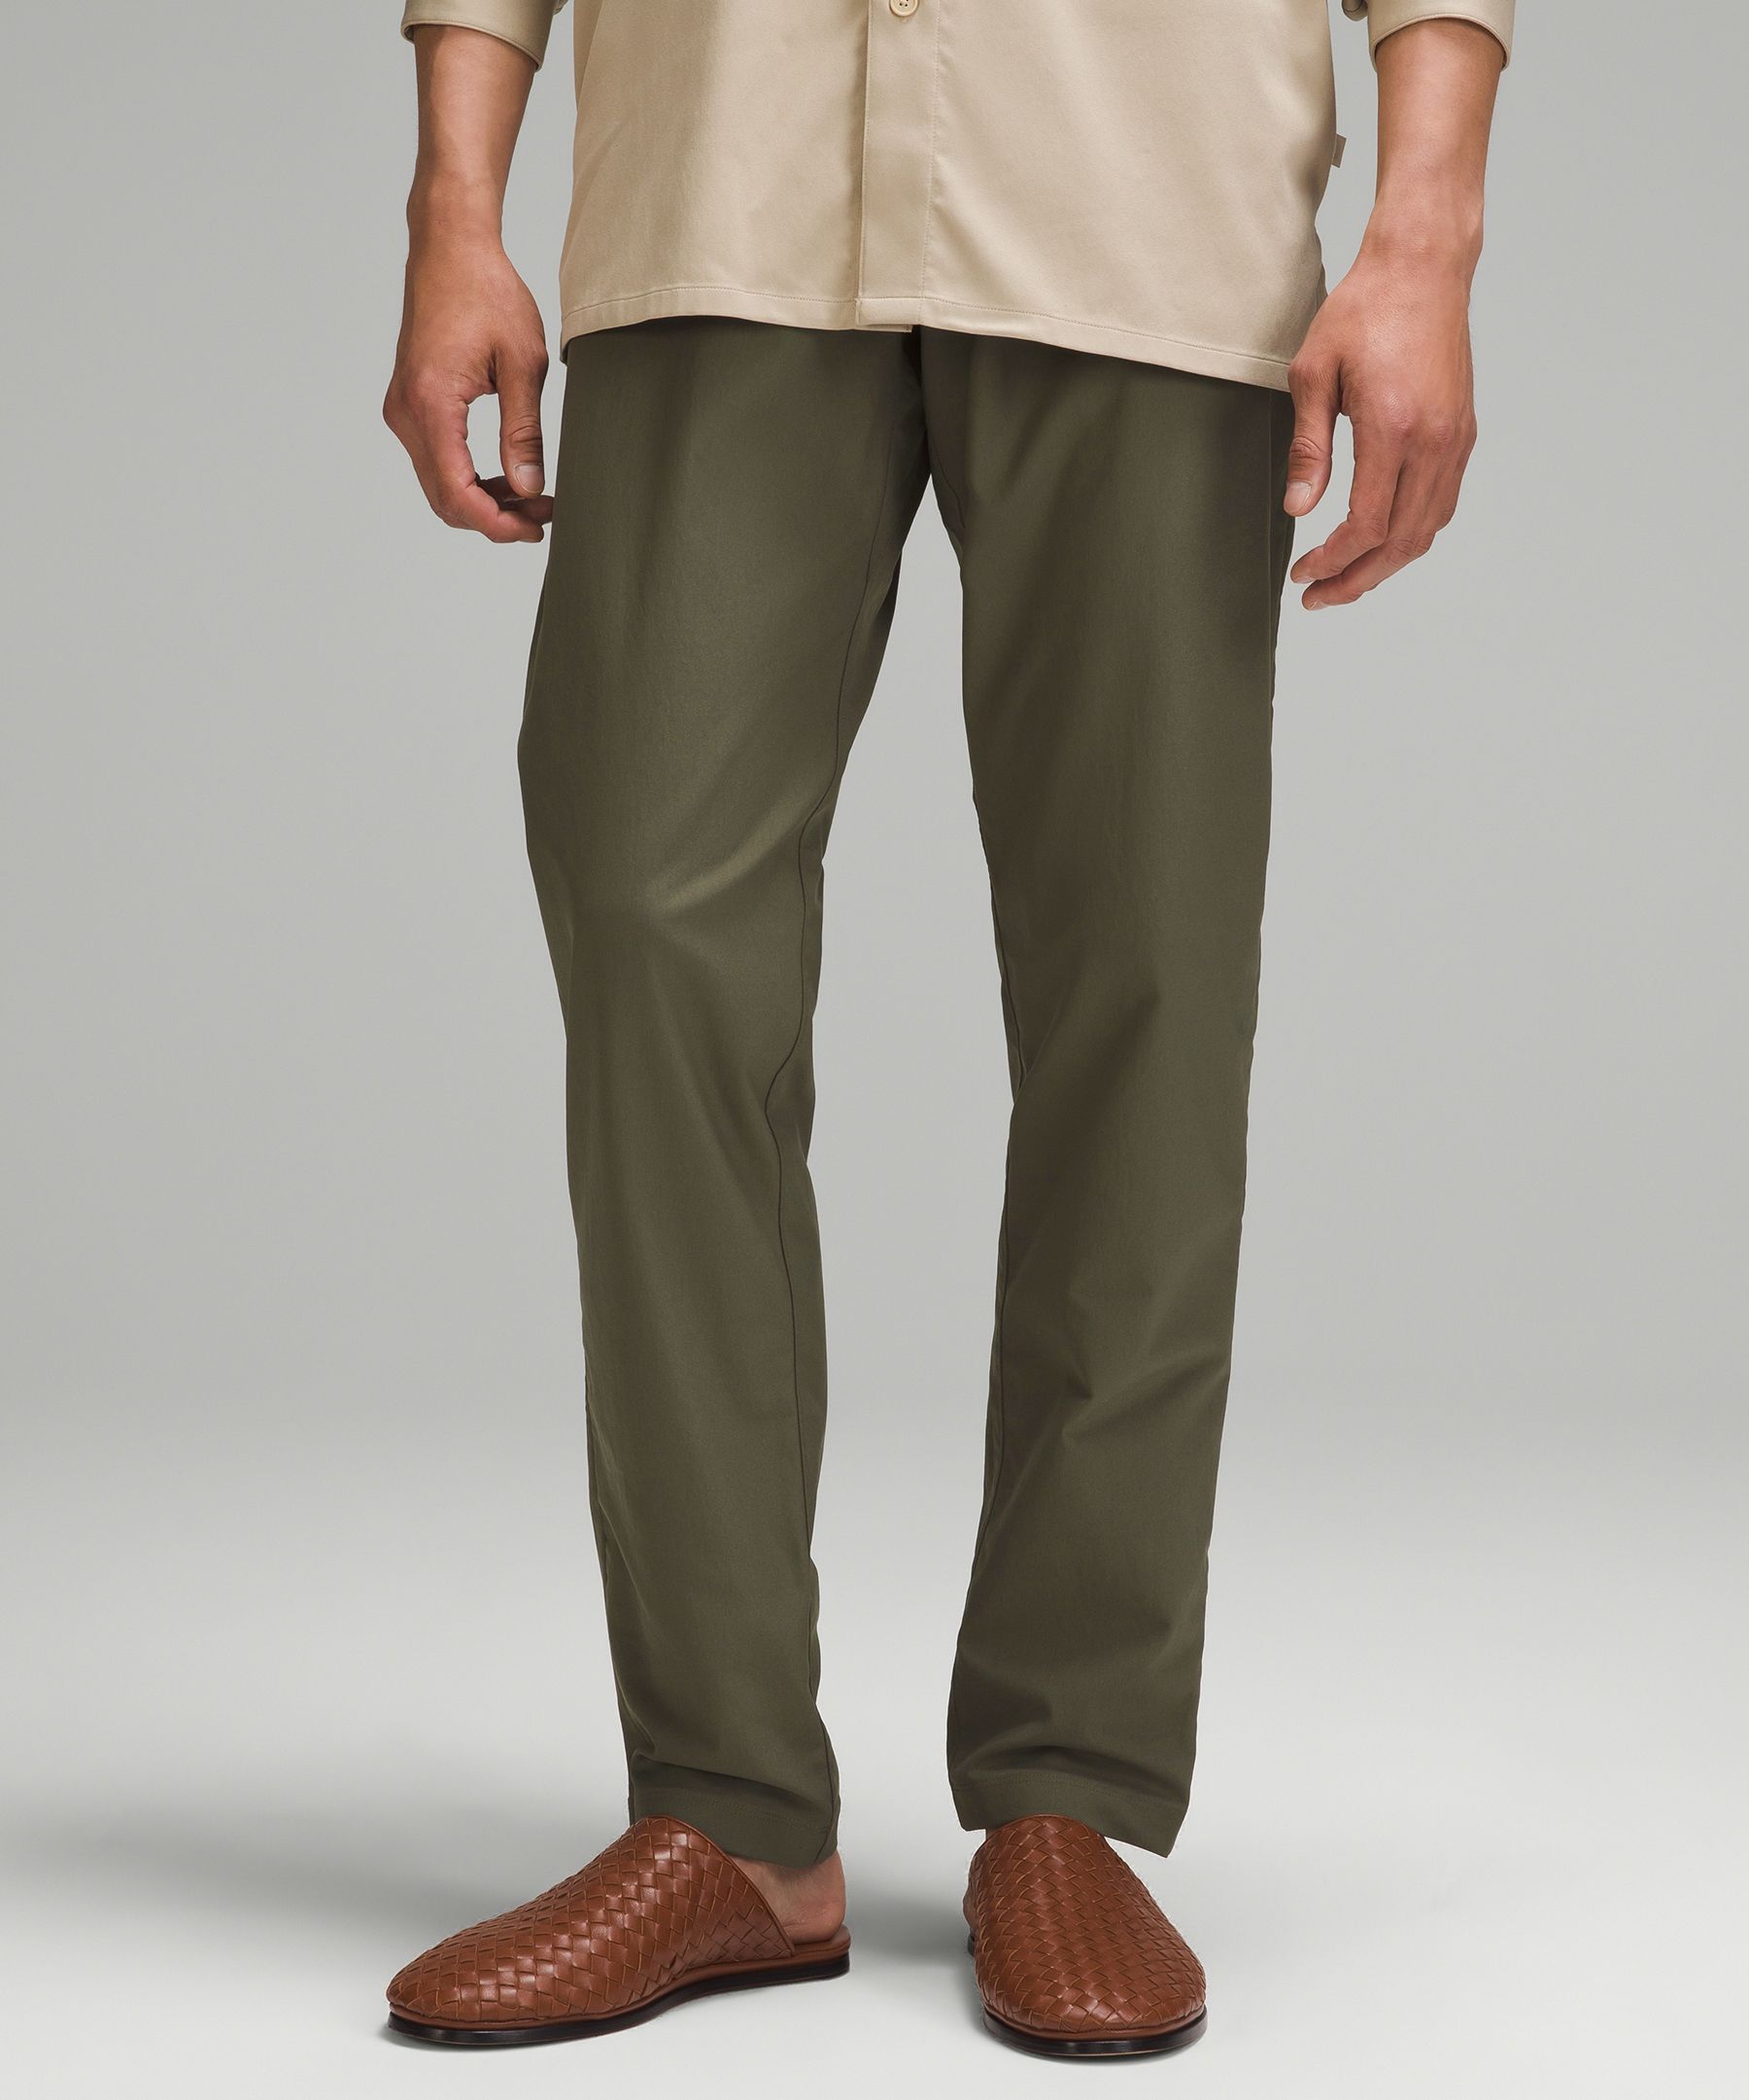 ABC Classic-Fit Trouser 30"L *Smooth Twill | Men's Trousers